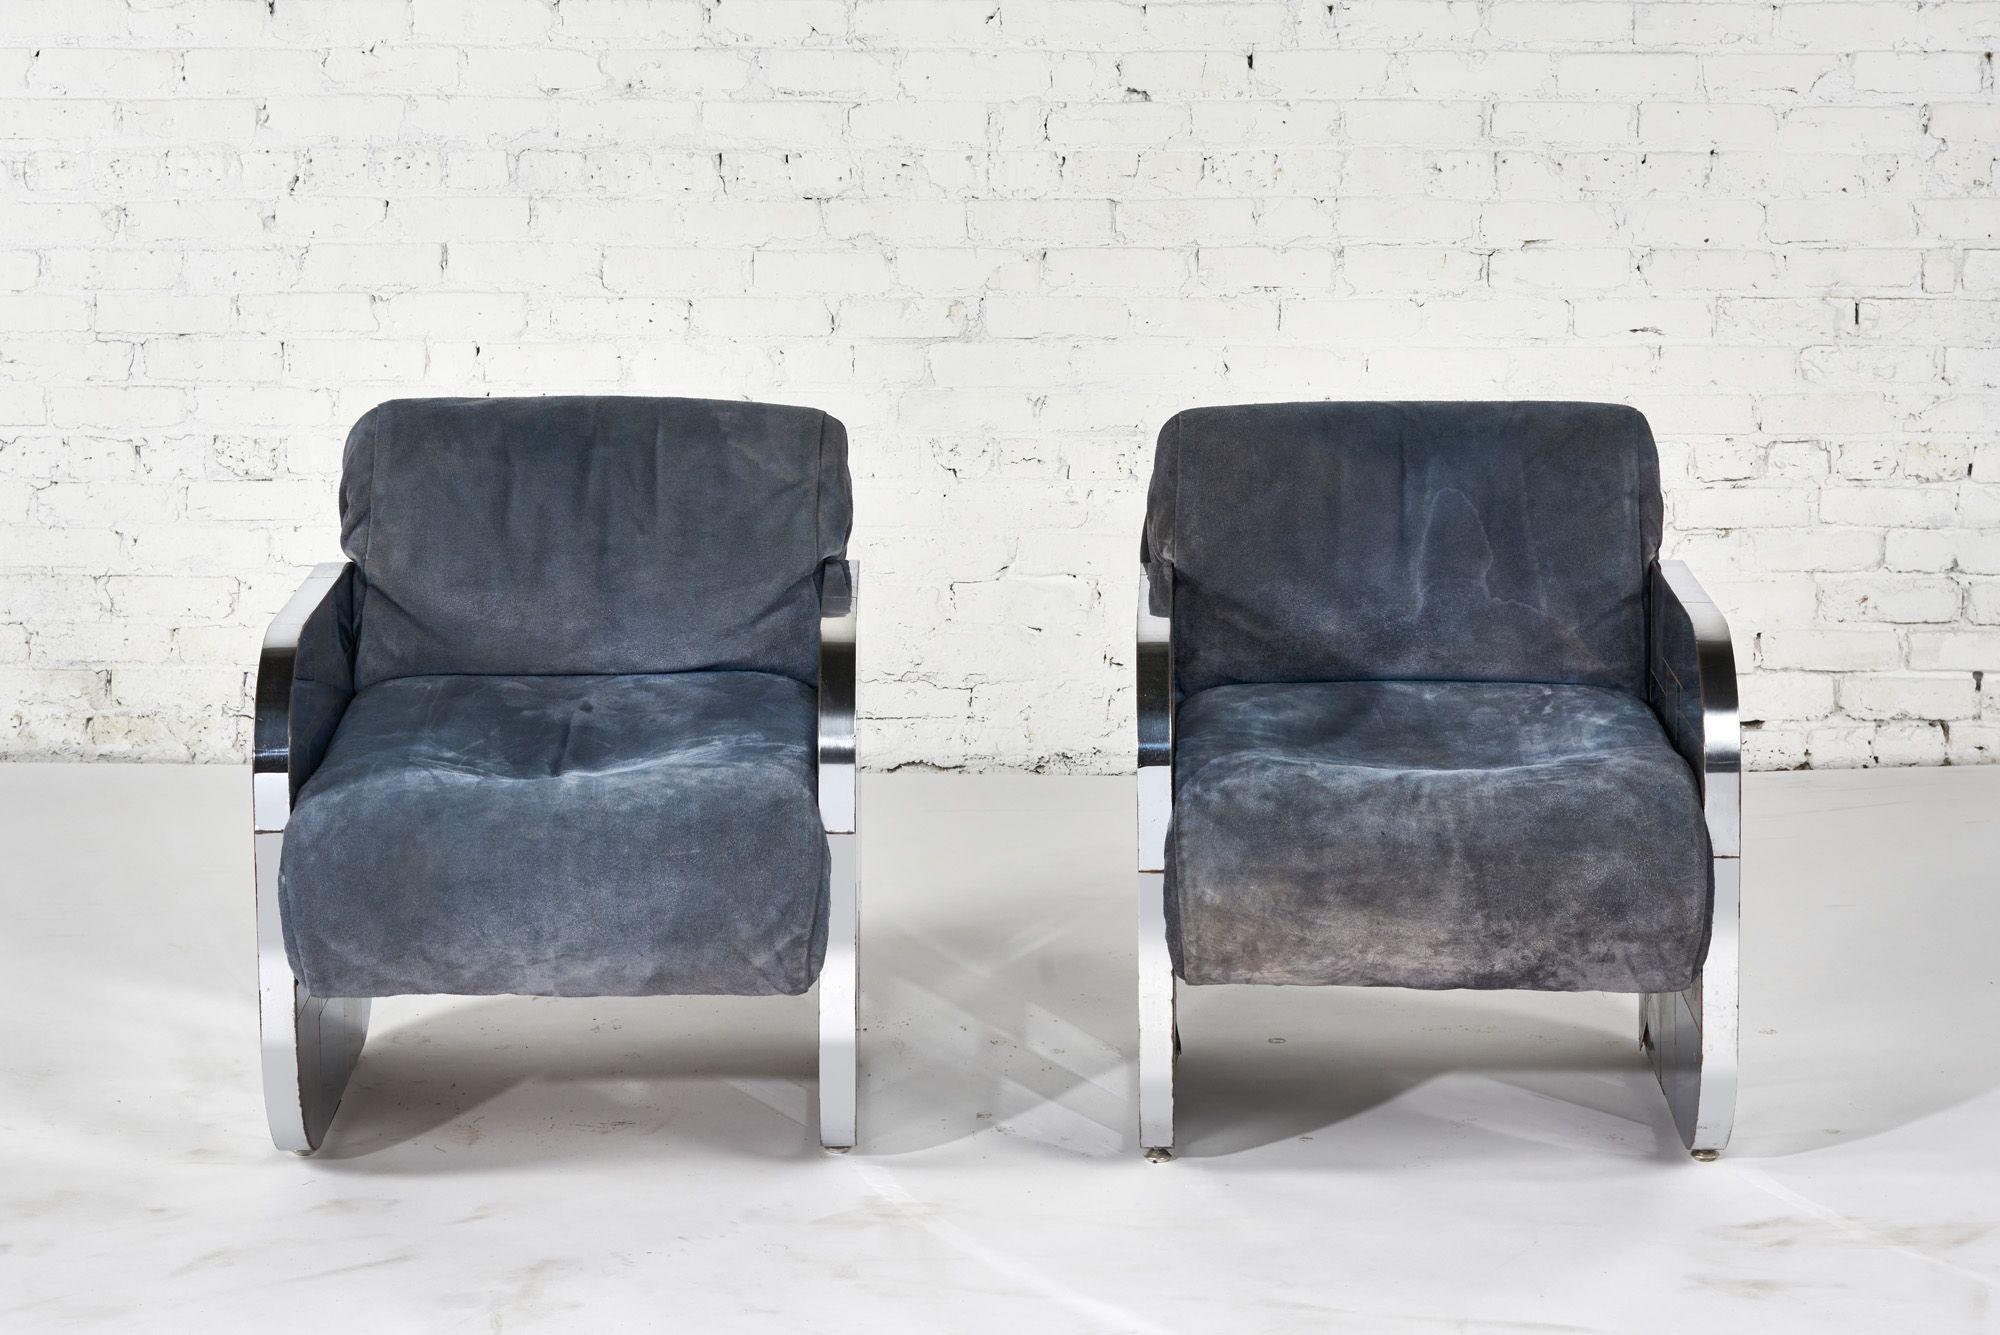 A rare pair of Paul Evans Cityscape Patchwork Lounge Chairs, 1970. Upholstery is blue suede all original. Patchwork is constructed of steel plate frames with contrast of polished chrome.